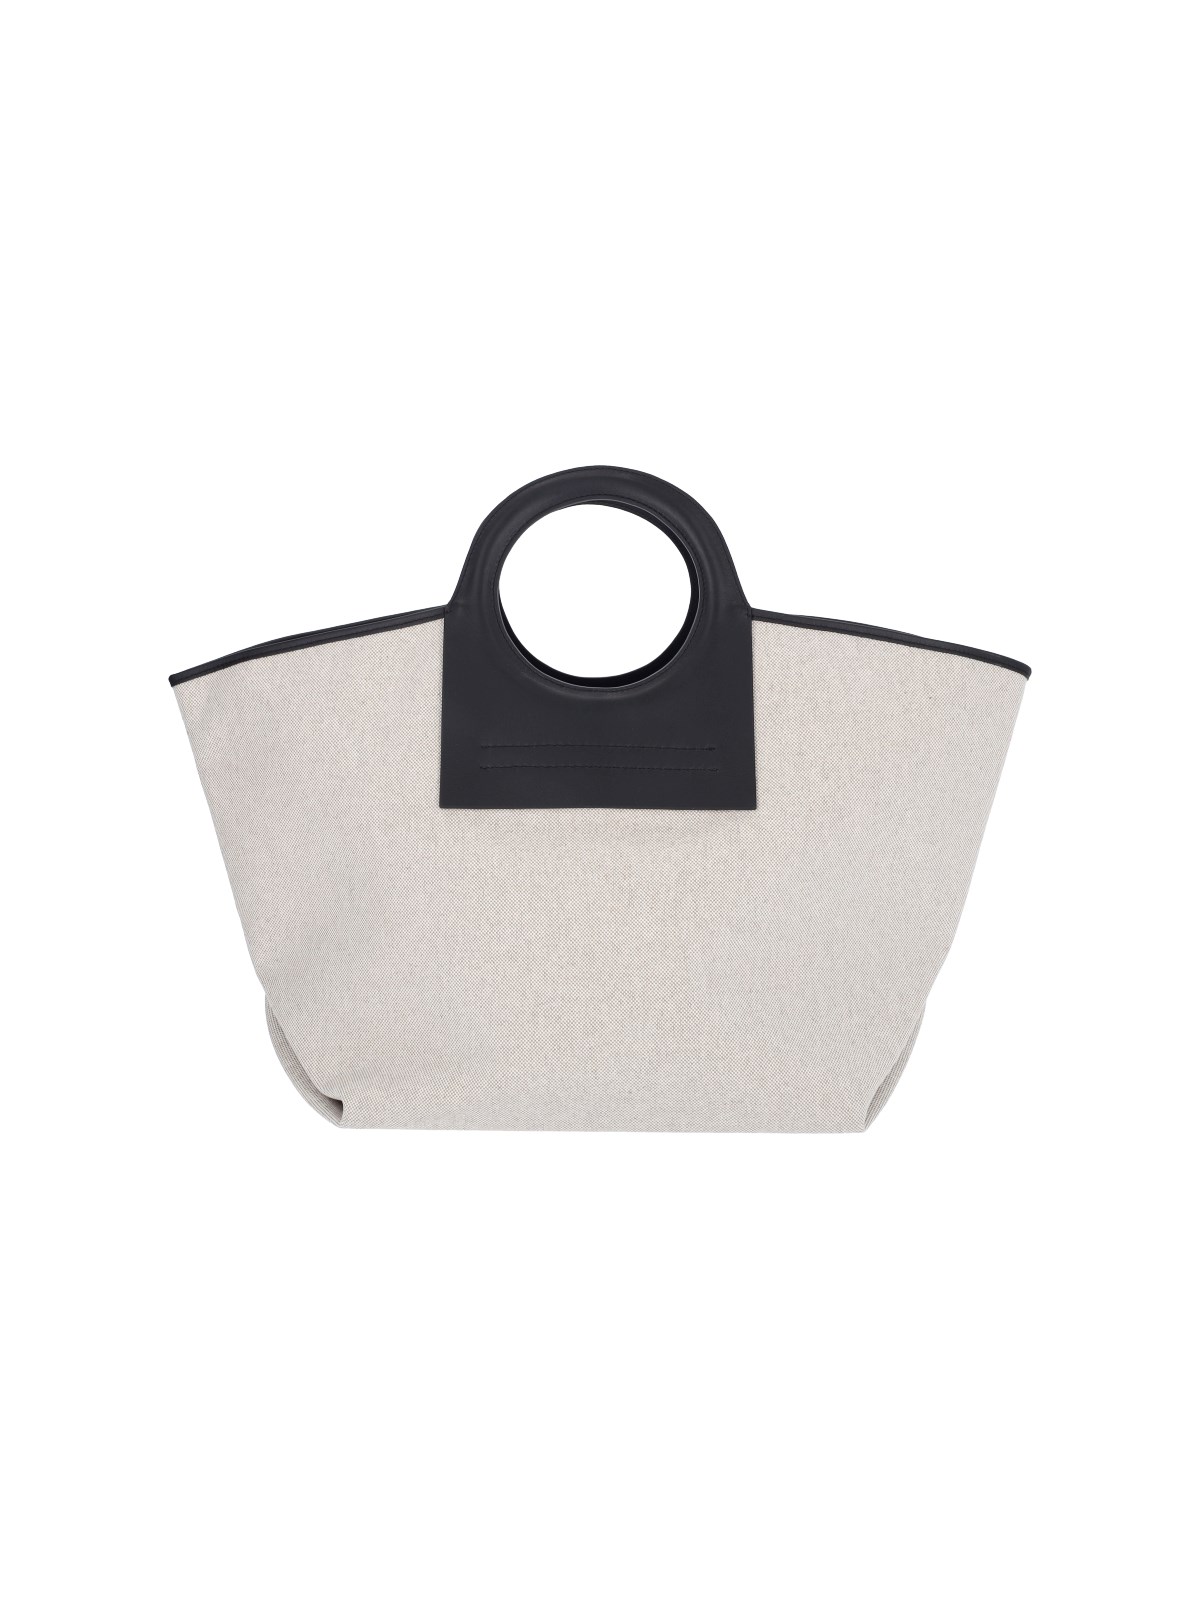 Hereu Cala Canvas Tote Bag With Leather Strap In Black  